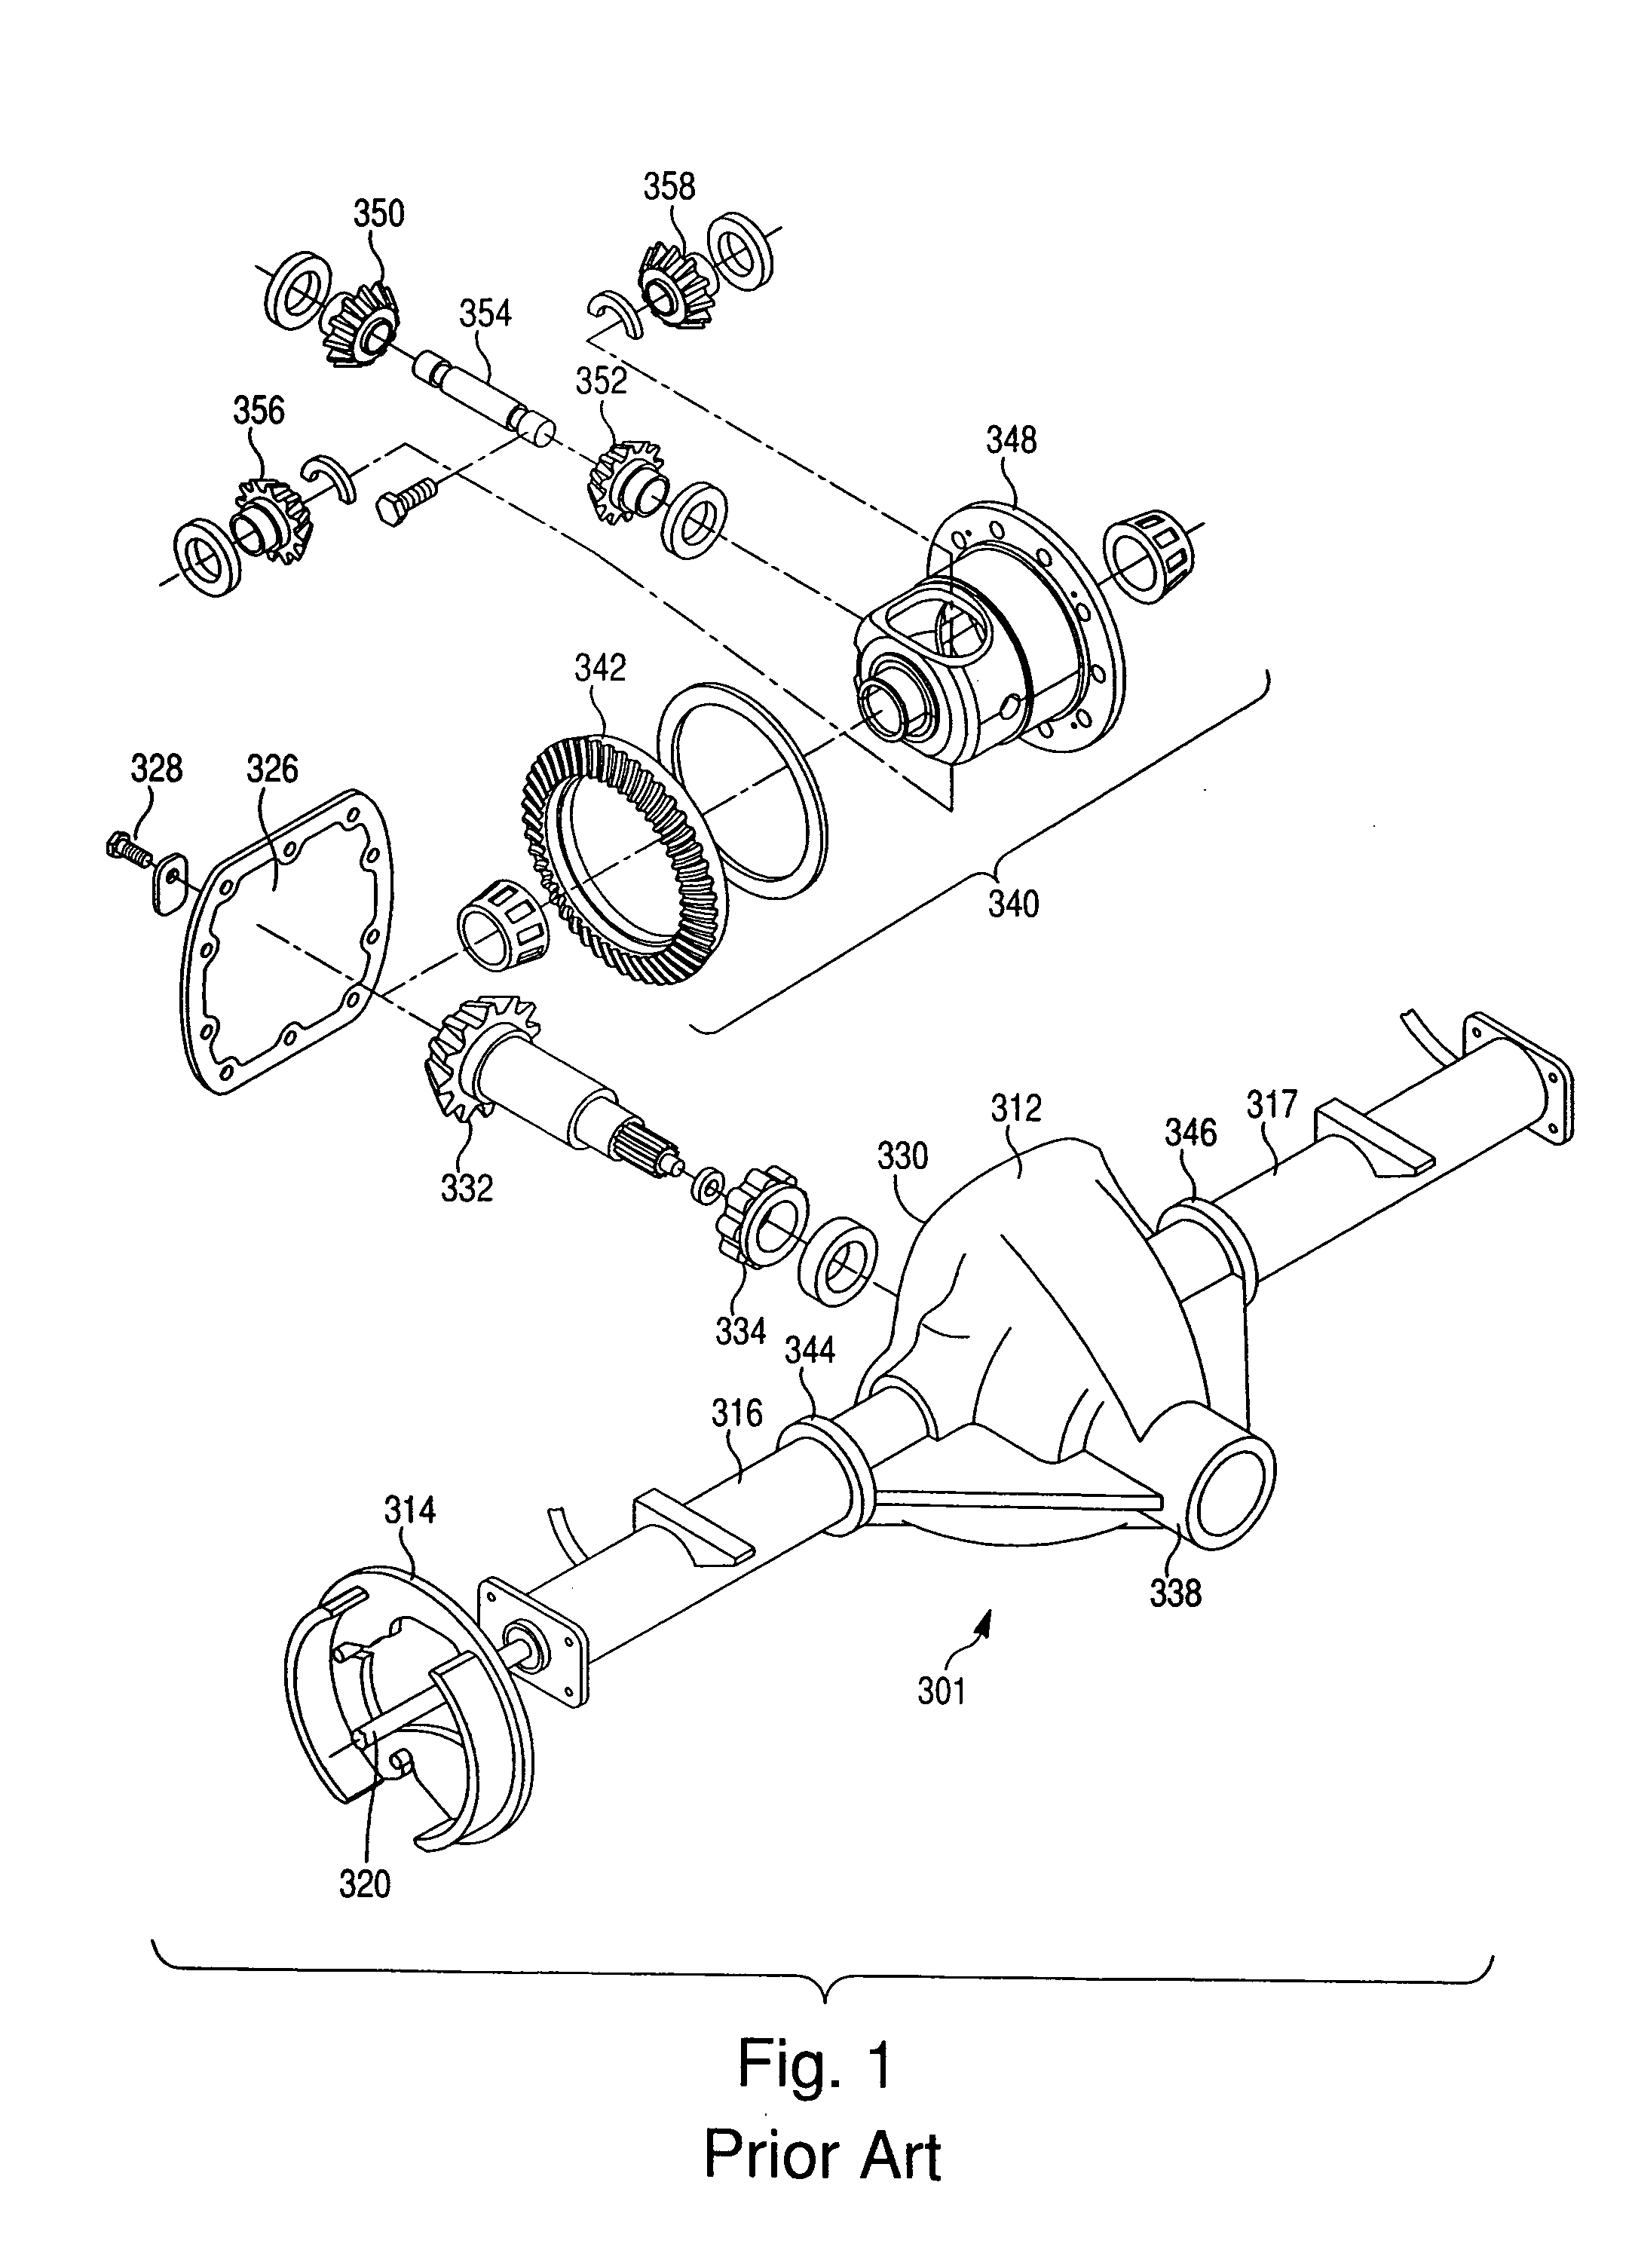 Drive axle for motor vehicles and method for assembling the same